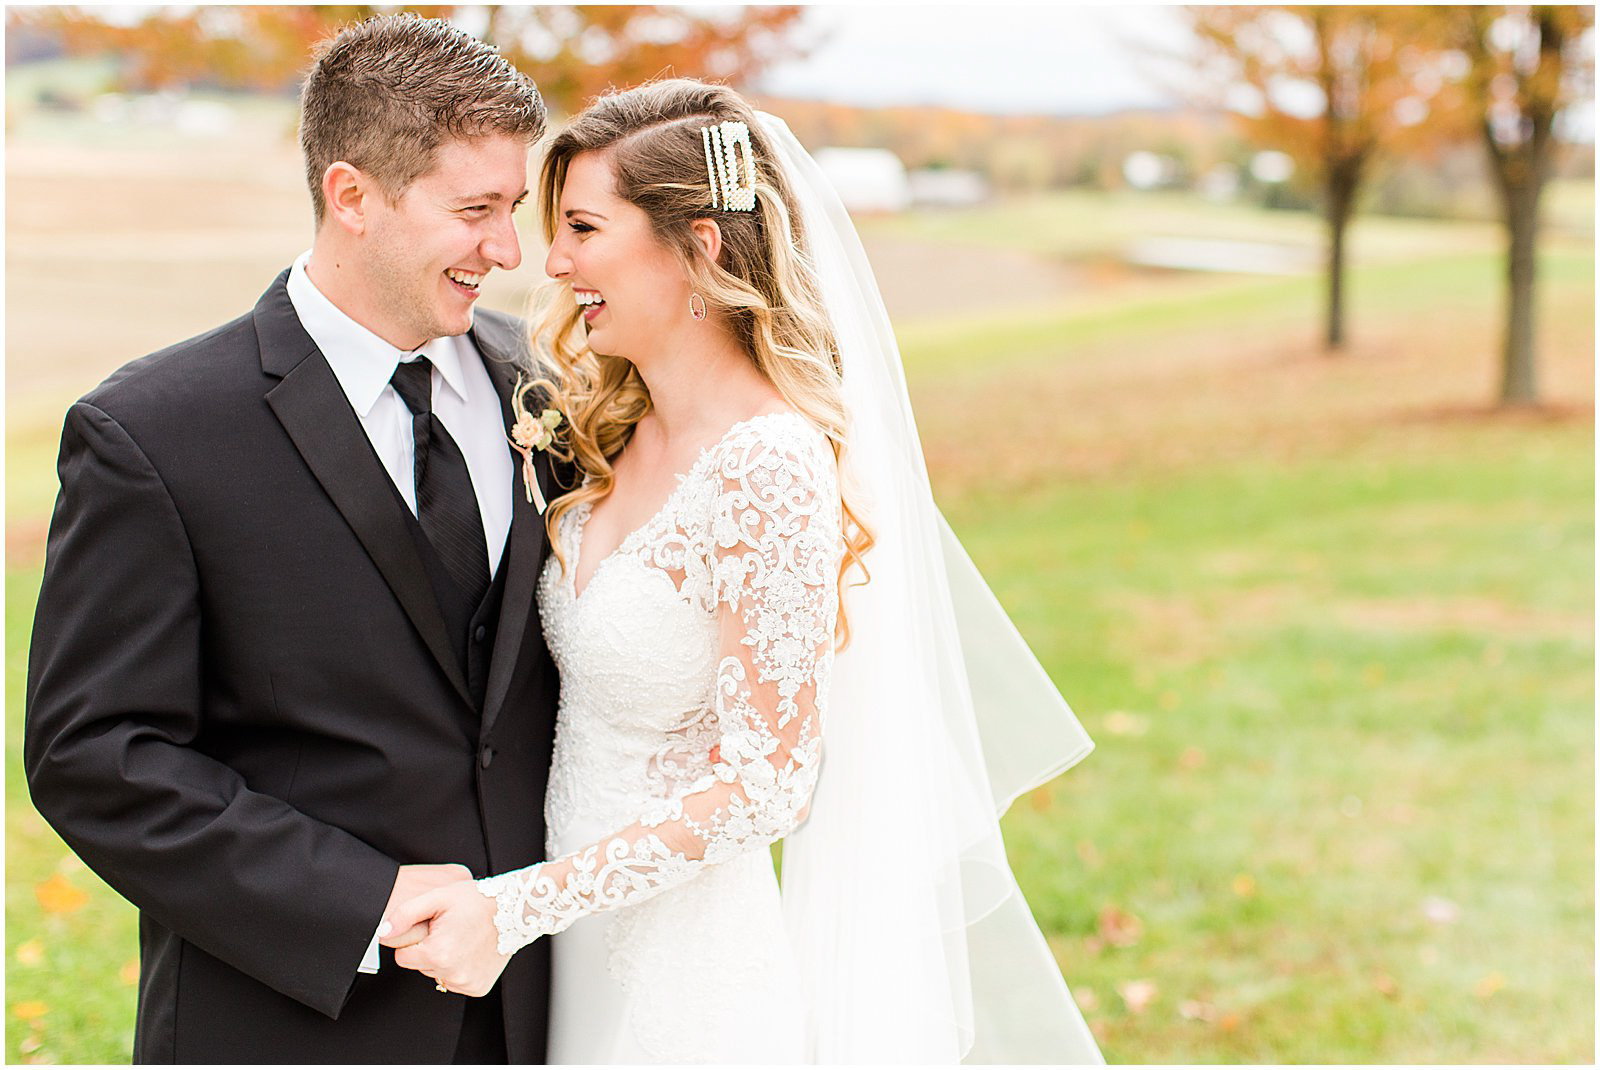 A Romantic Fall Wedding in Ferdinand, IN | Tori and Kyle | Bret and Brandie Photography 0061.jpg